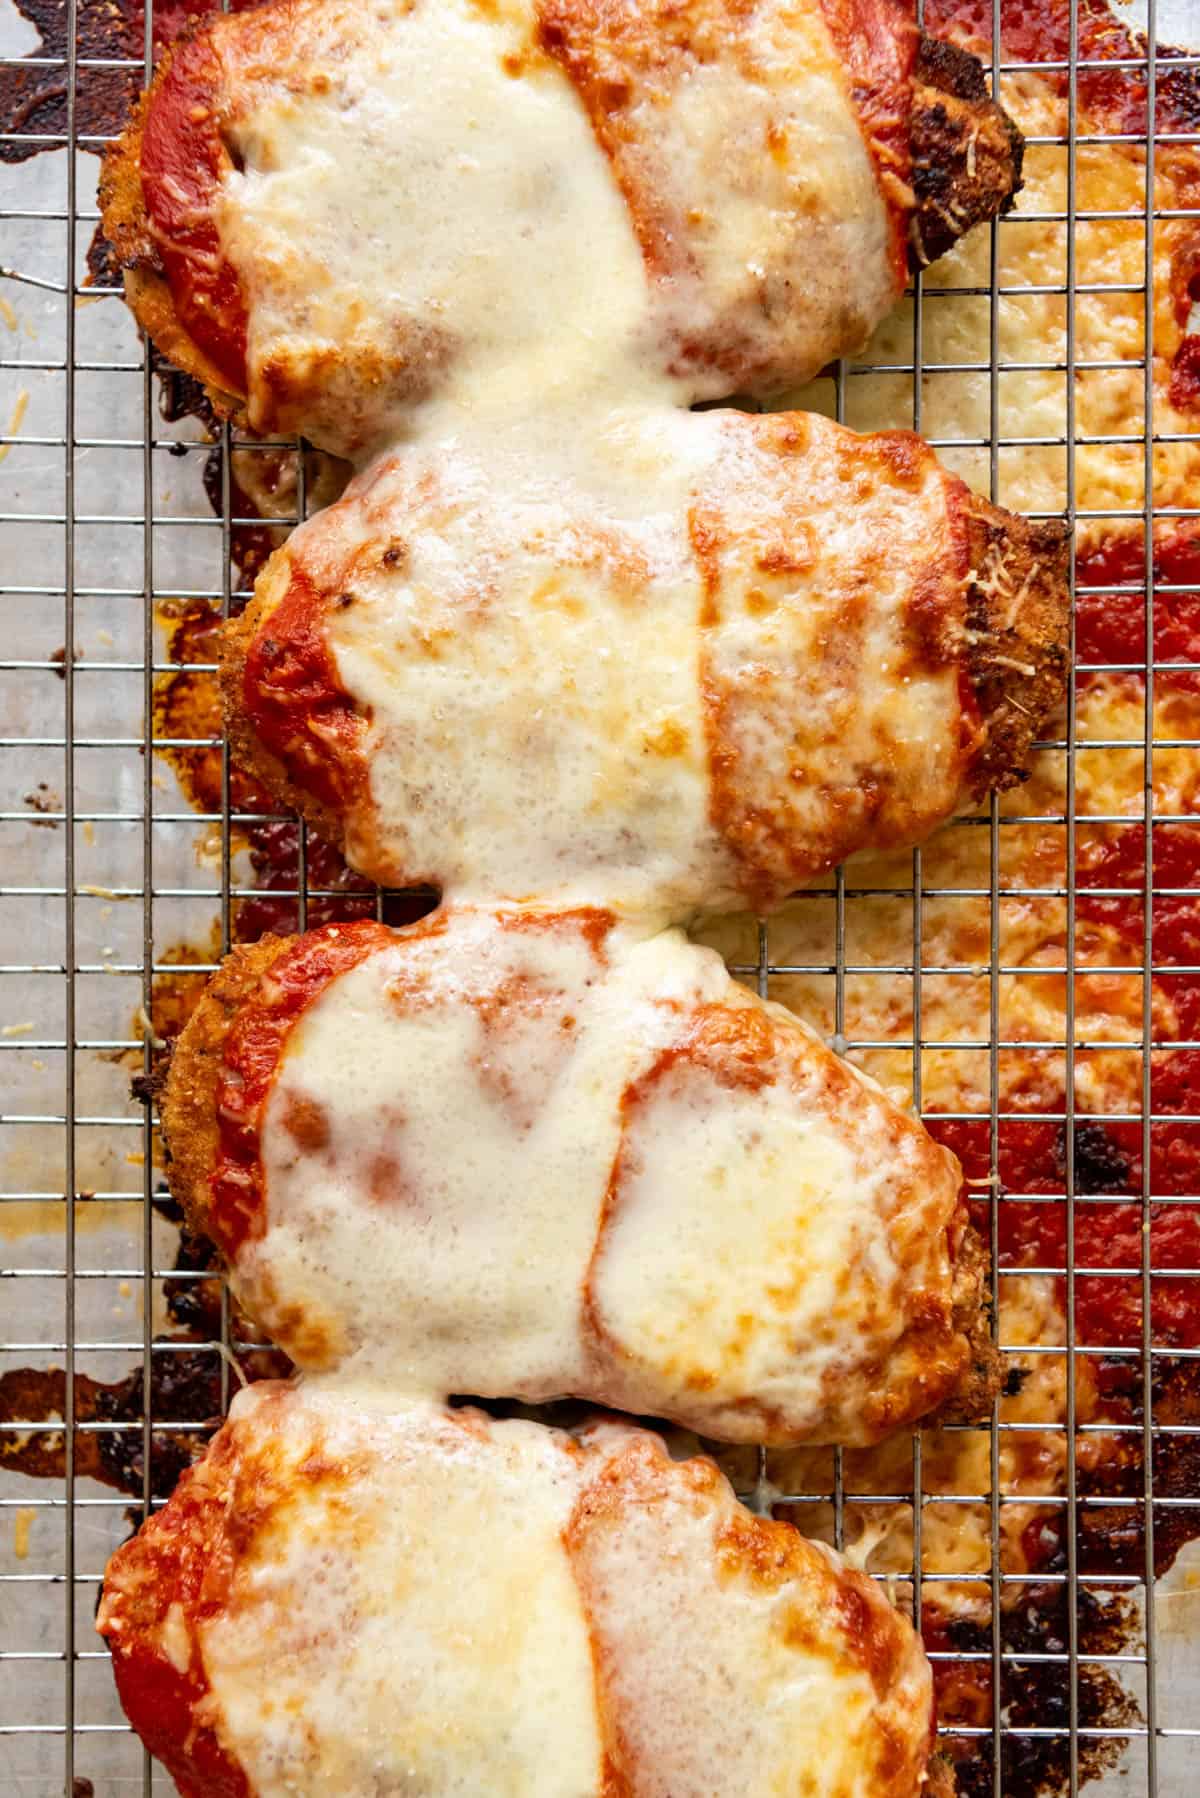 An overhead image of chicken parmesan with melted cheese on top on a wire rack.